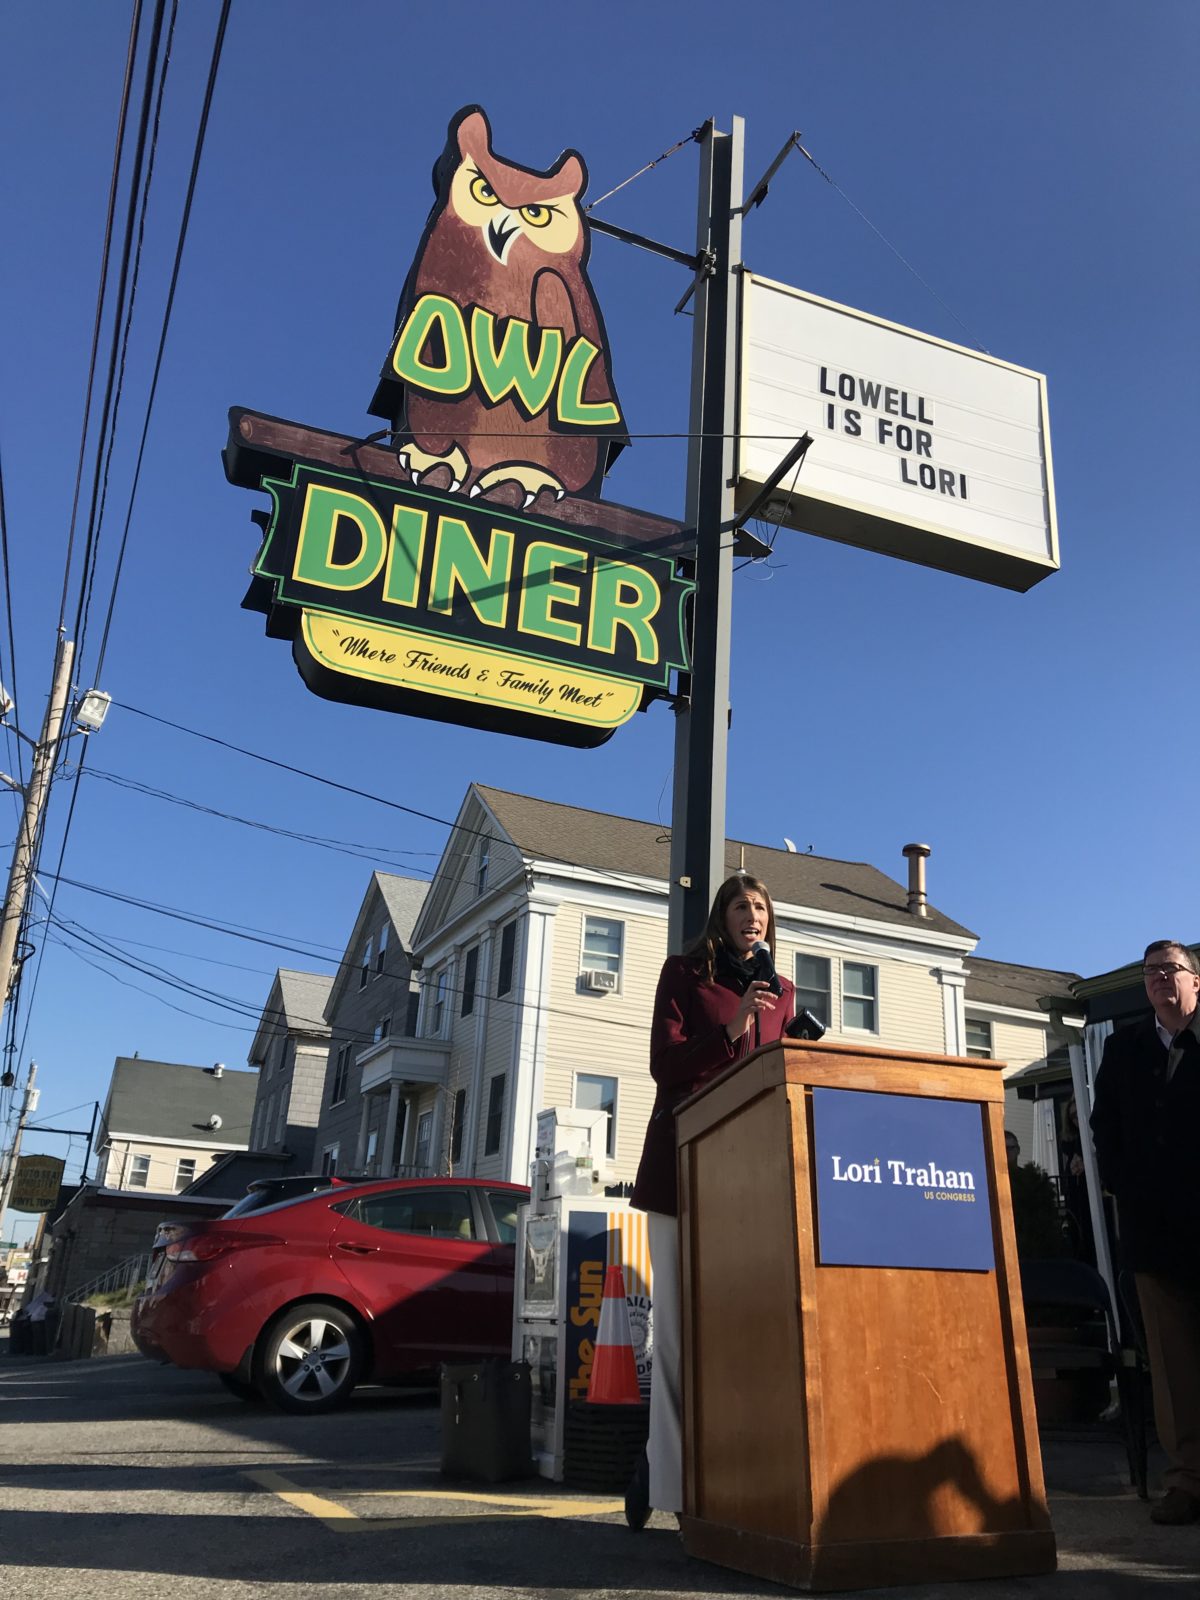 Reps. Tom Golden, David Nangle and Rady Mom endorsed Lori Trahan in an announcement at the Owl Diner.